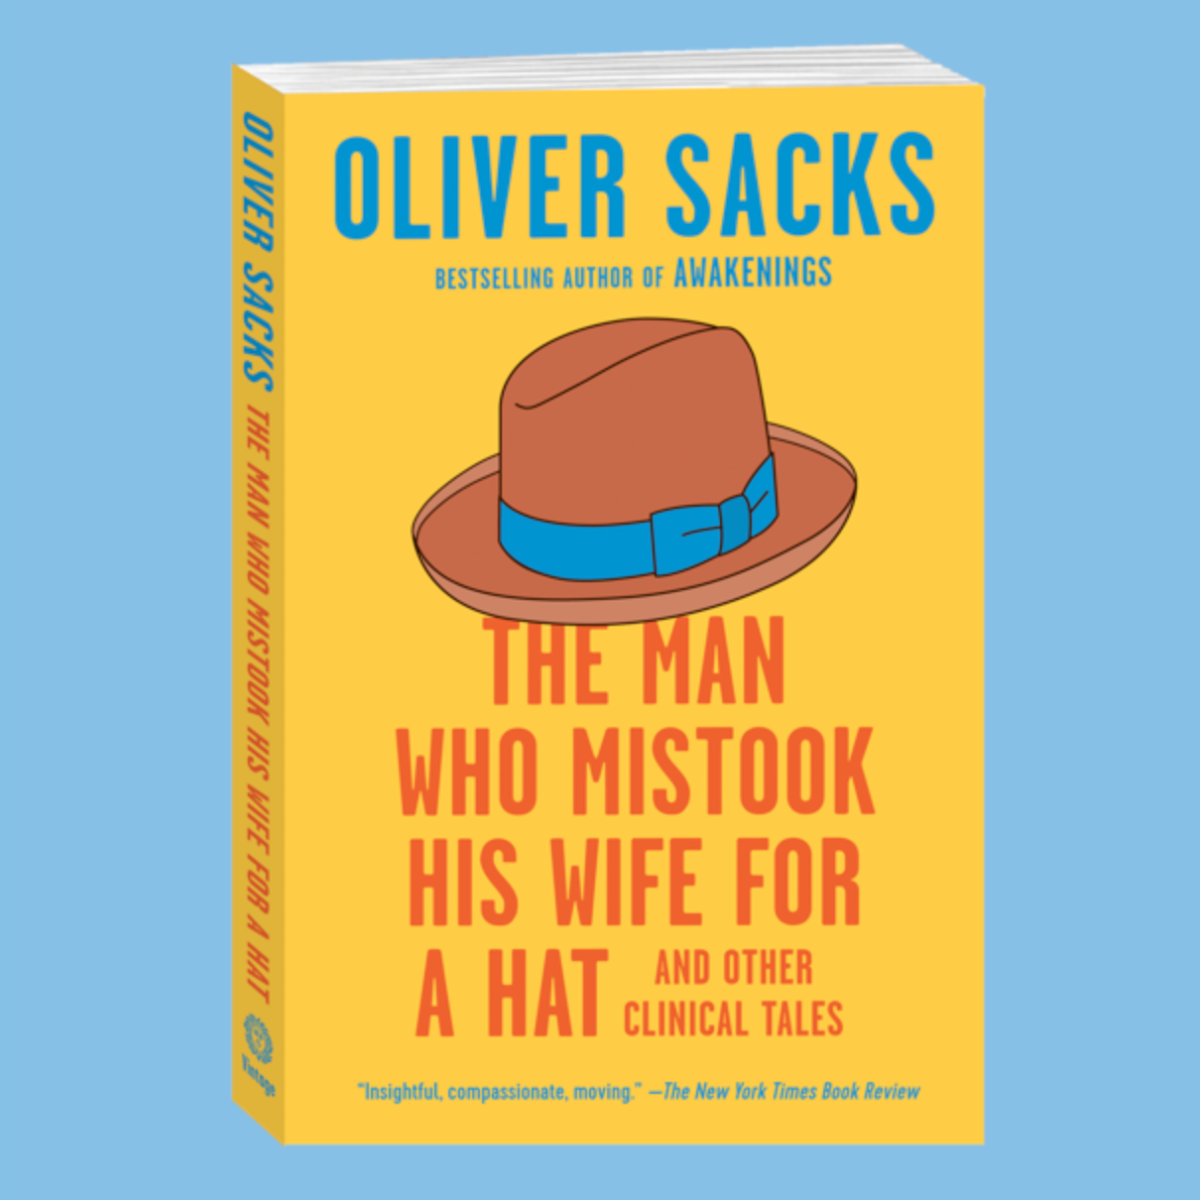 The cover of The Man Who Mistook His Wife for a Hat